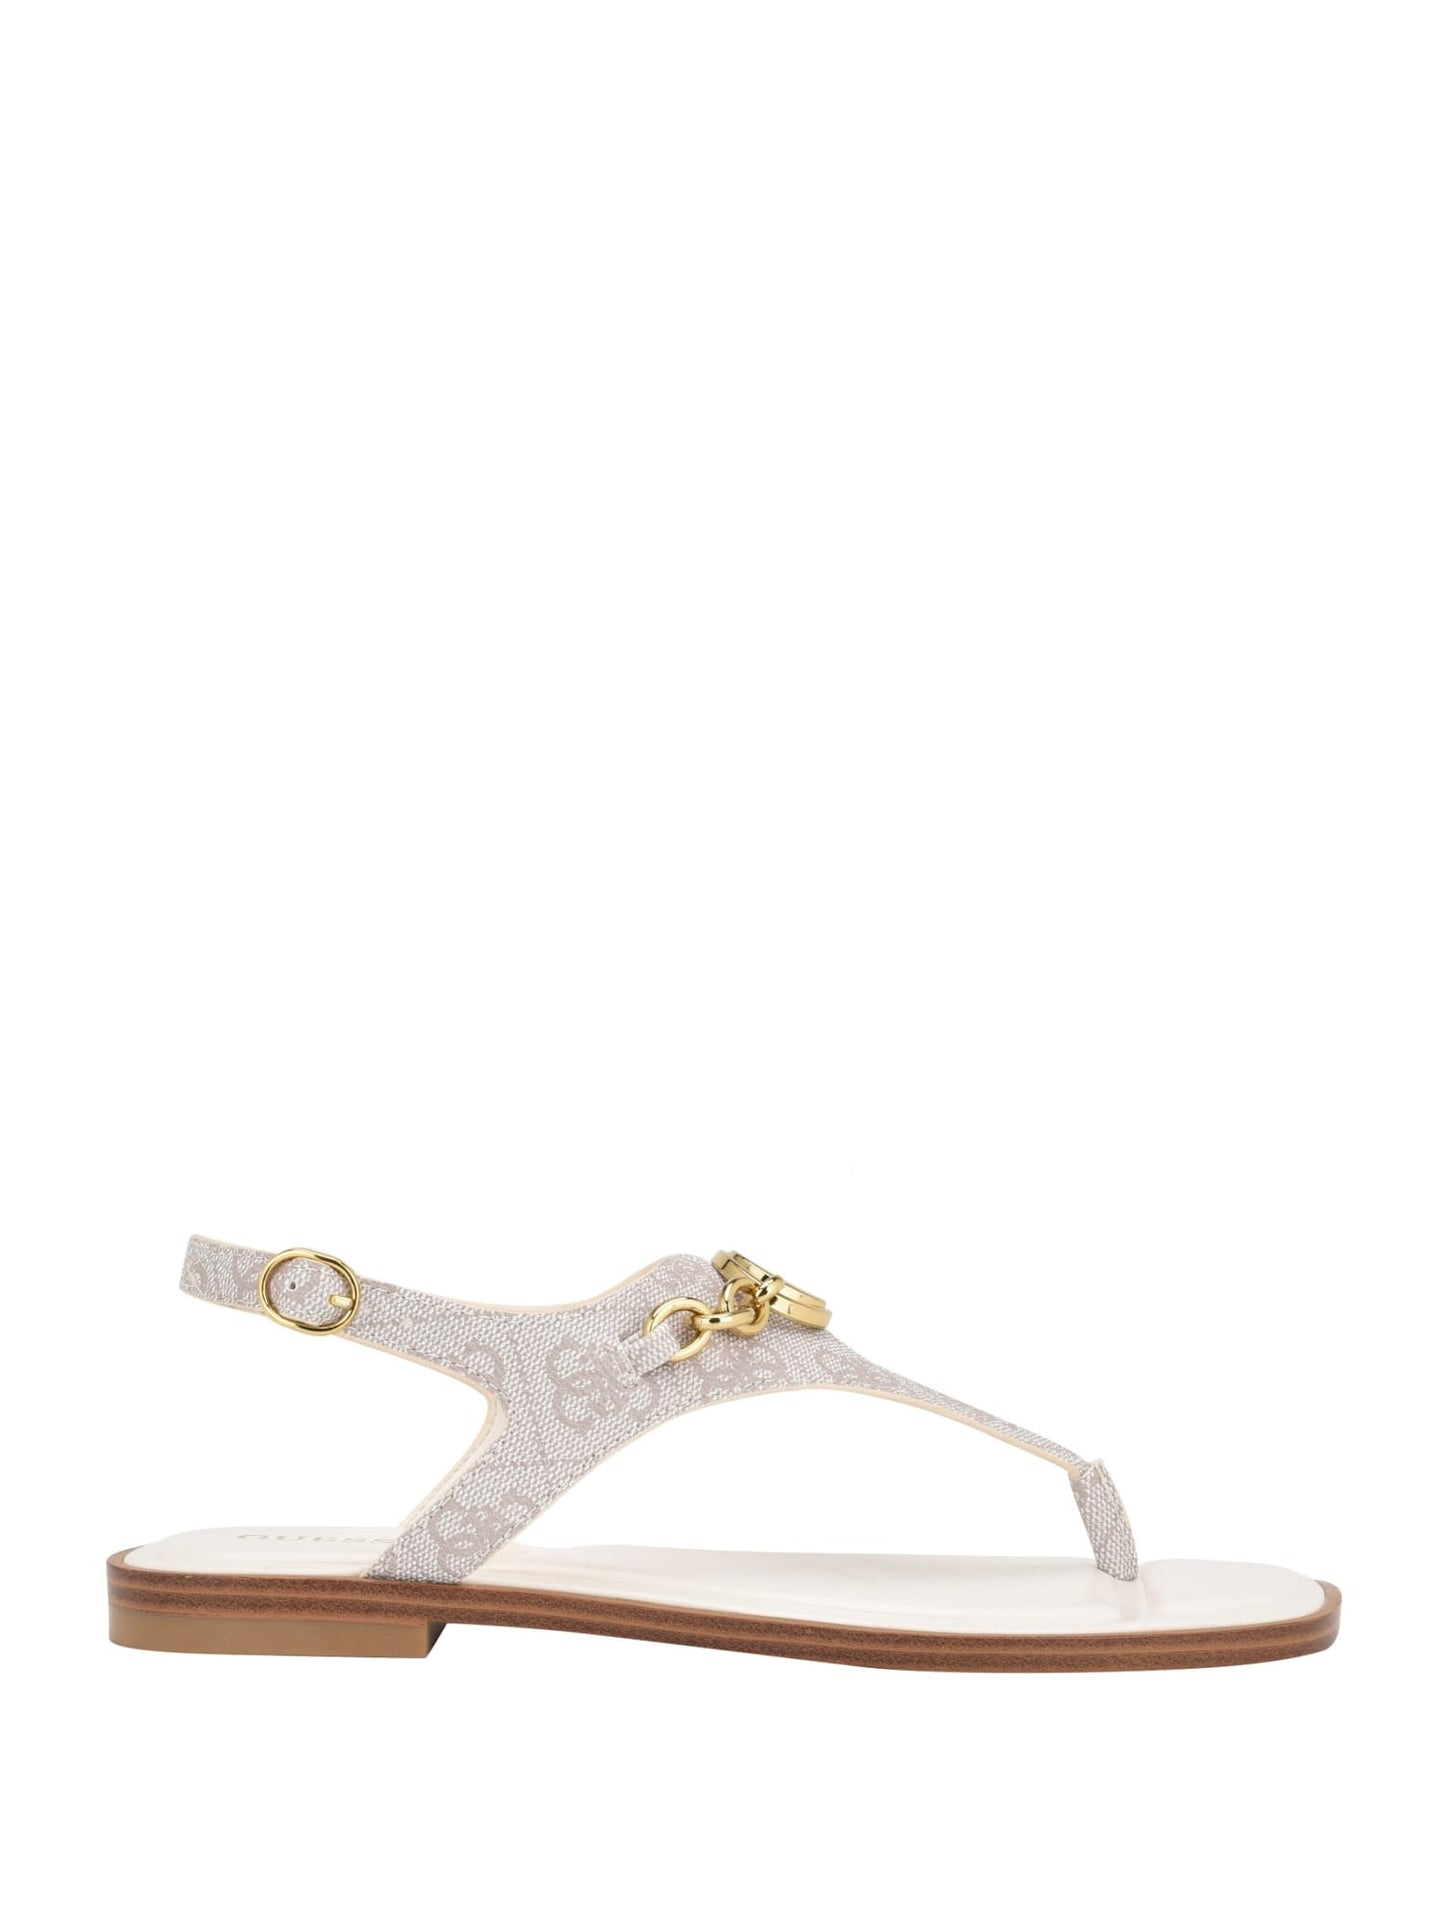 GUESS Women's Ivory Rissy Logo Sandals GWRISSY Side View